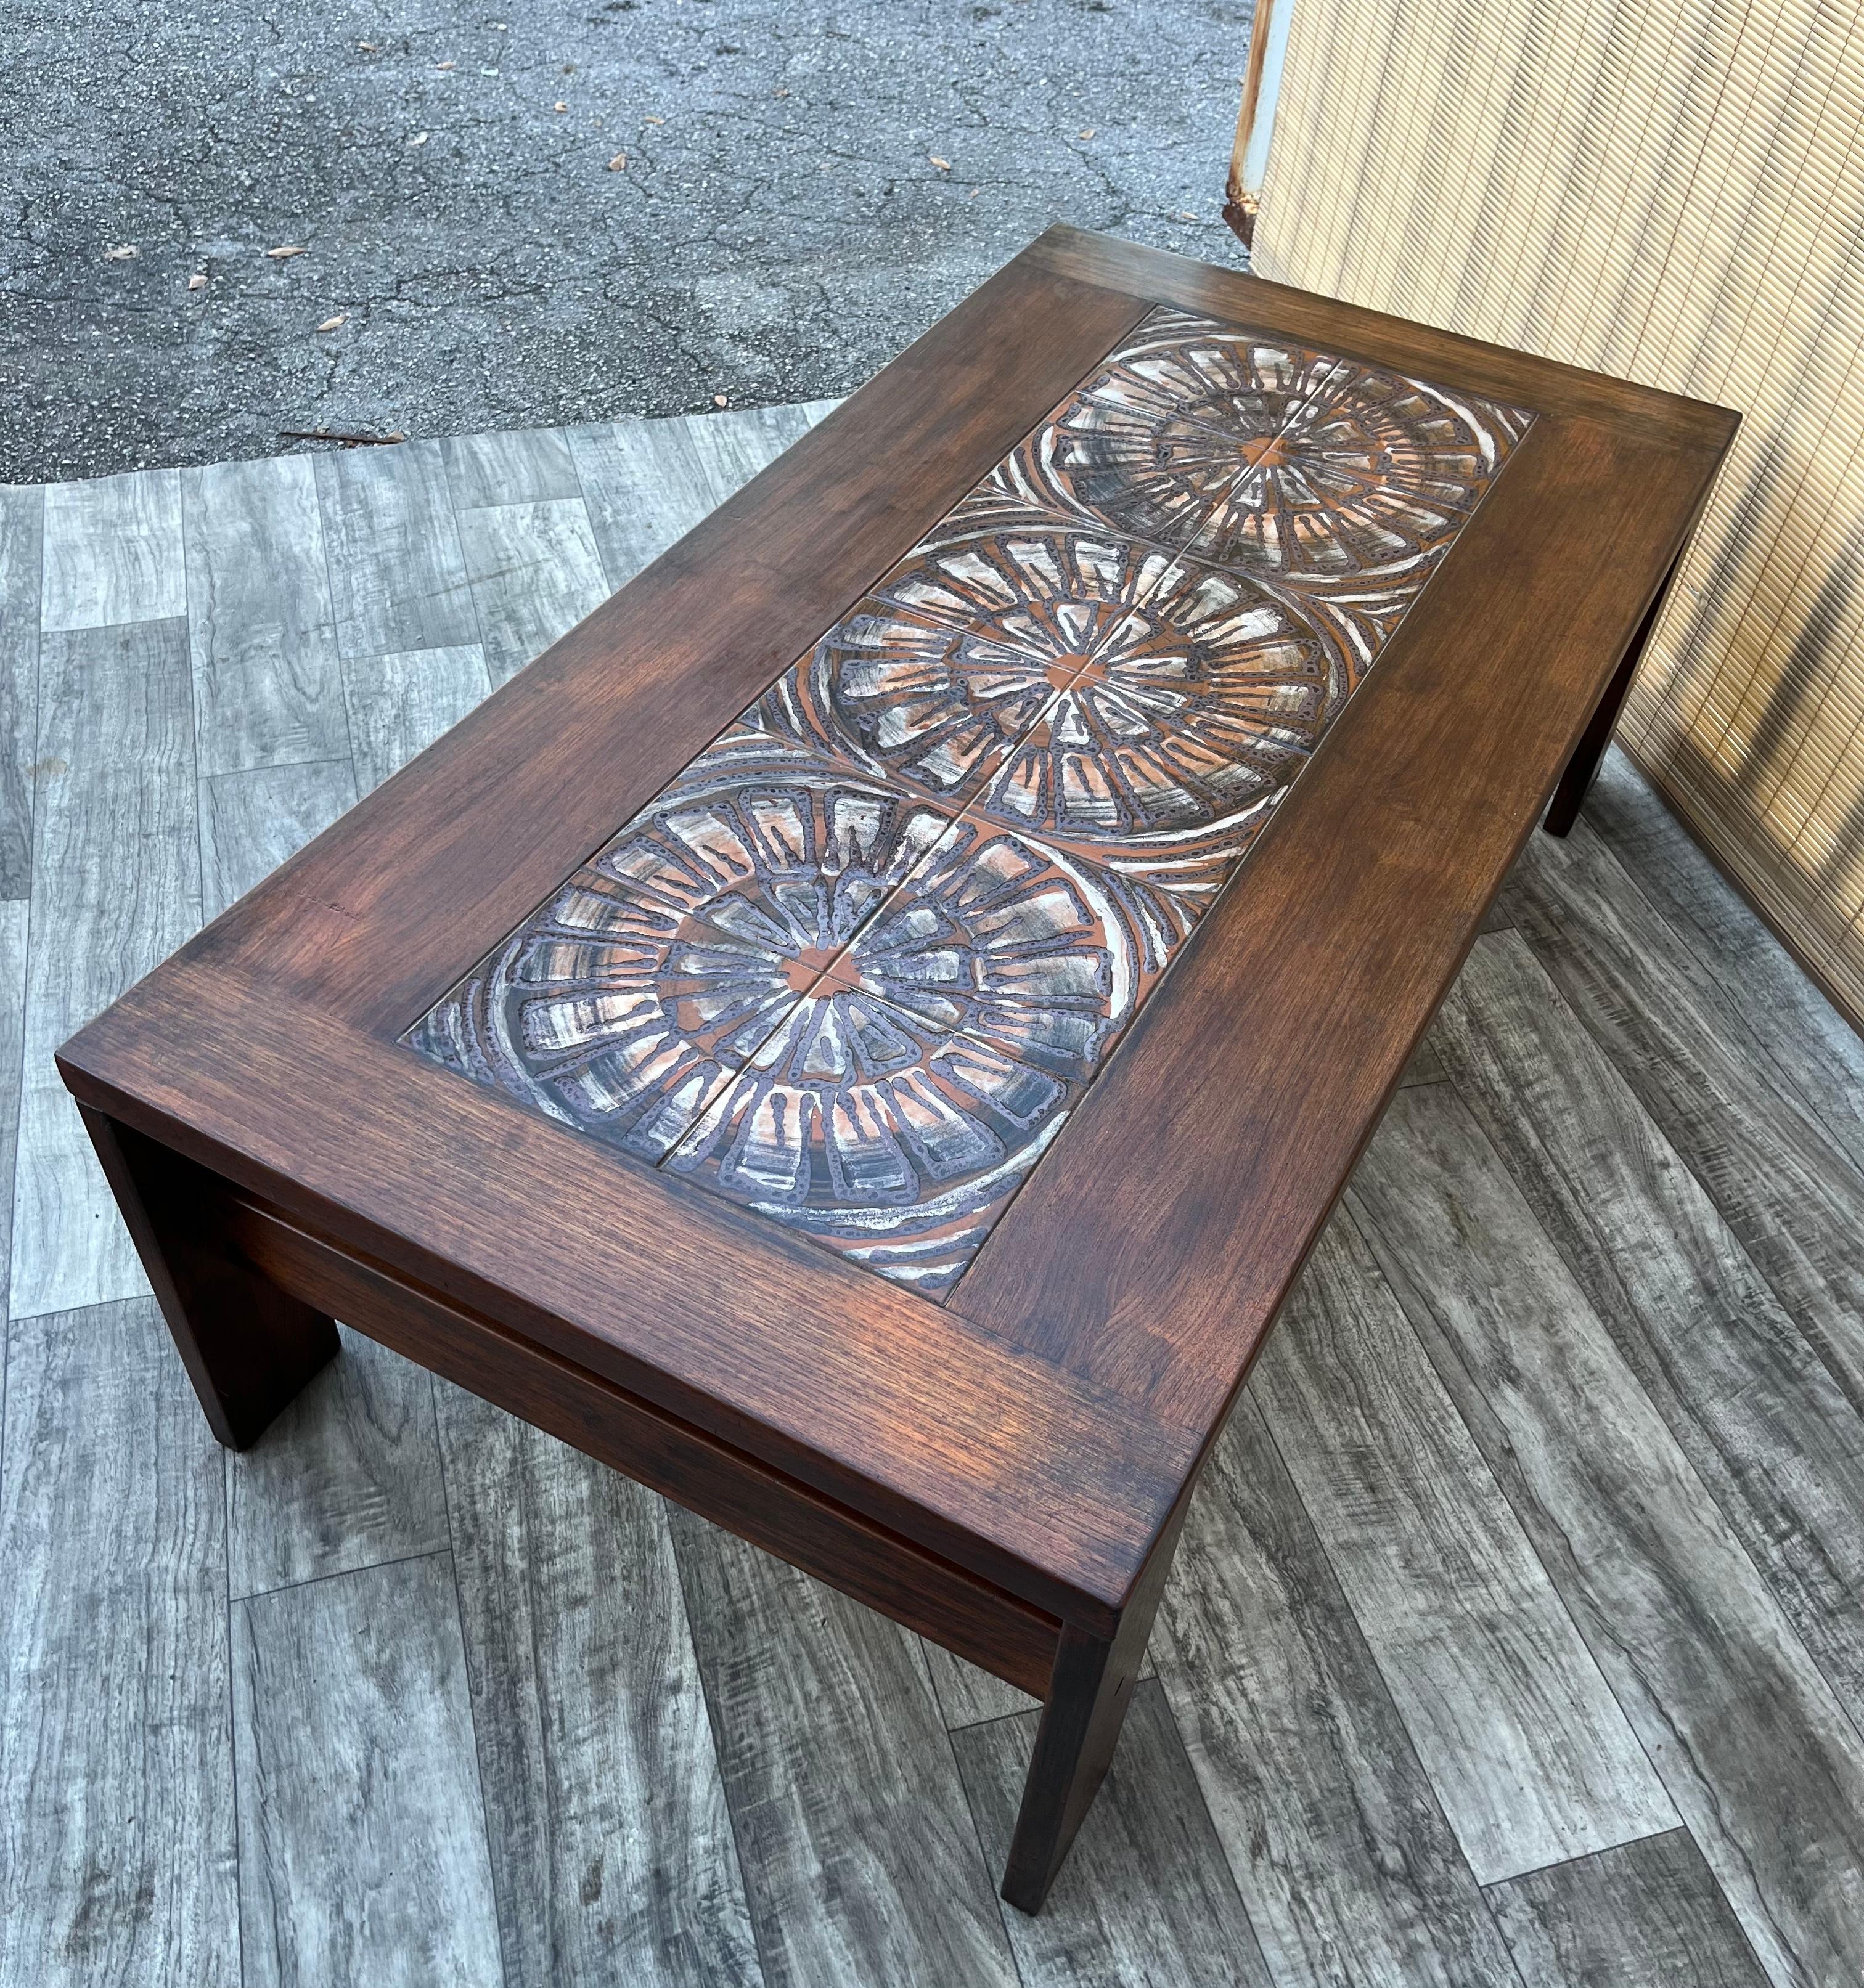 Danish Mid Century Modern Coffee Table With Ceramic Tile Inlays. Circa 1960s  For Sale 2